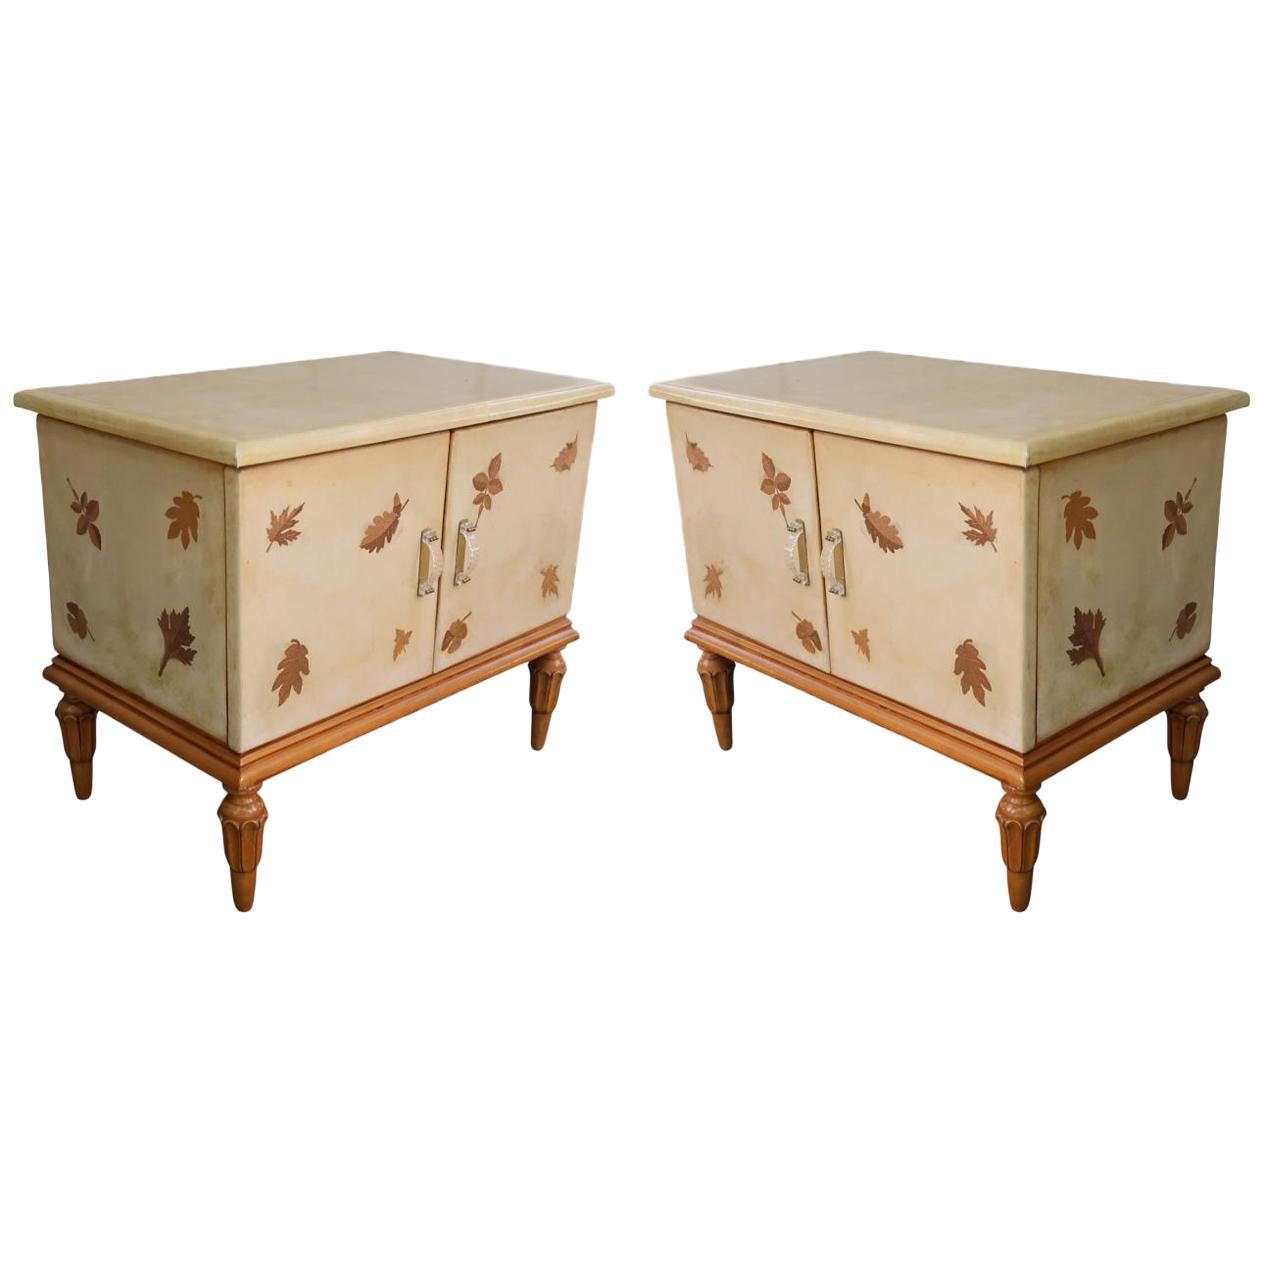 Giuseppe Anzani Pair of Parchment and Wood Midcentury Italian Commodes, 1950 For Sale